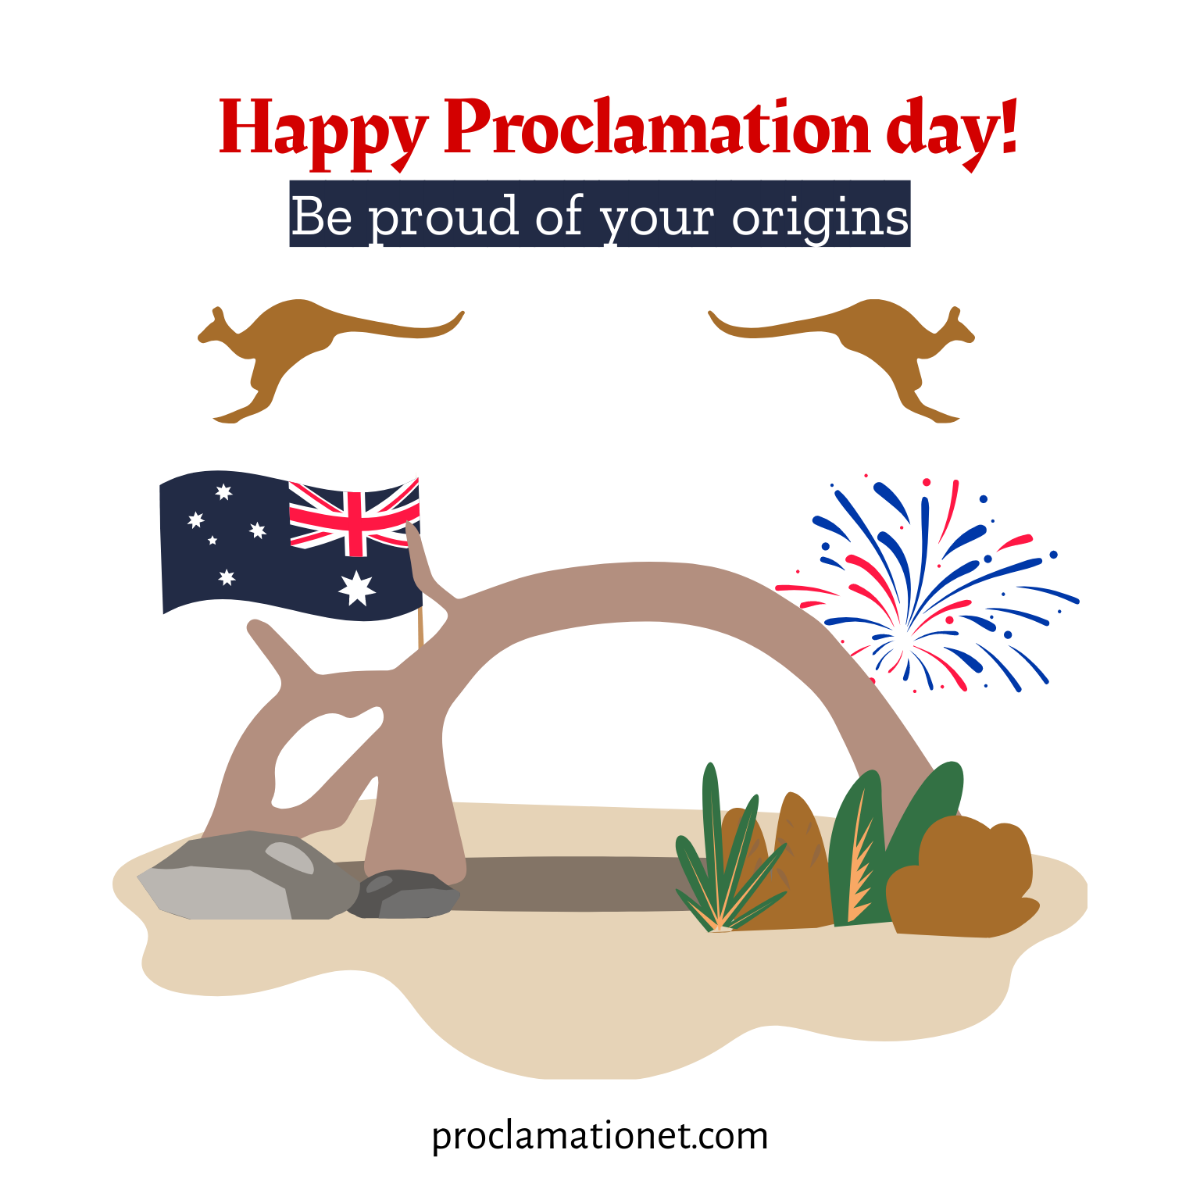 Proclamation Day Flyer Vector